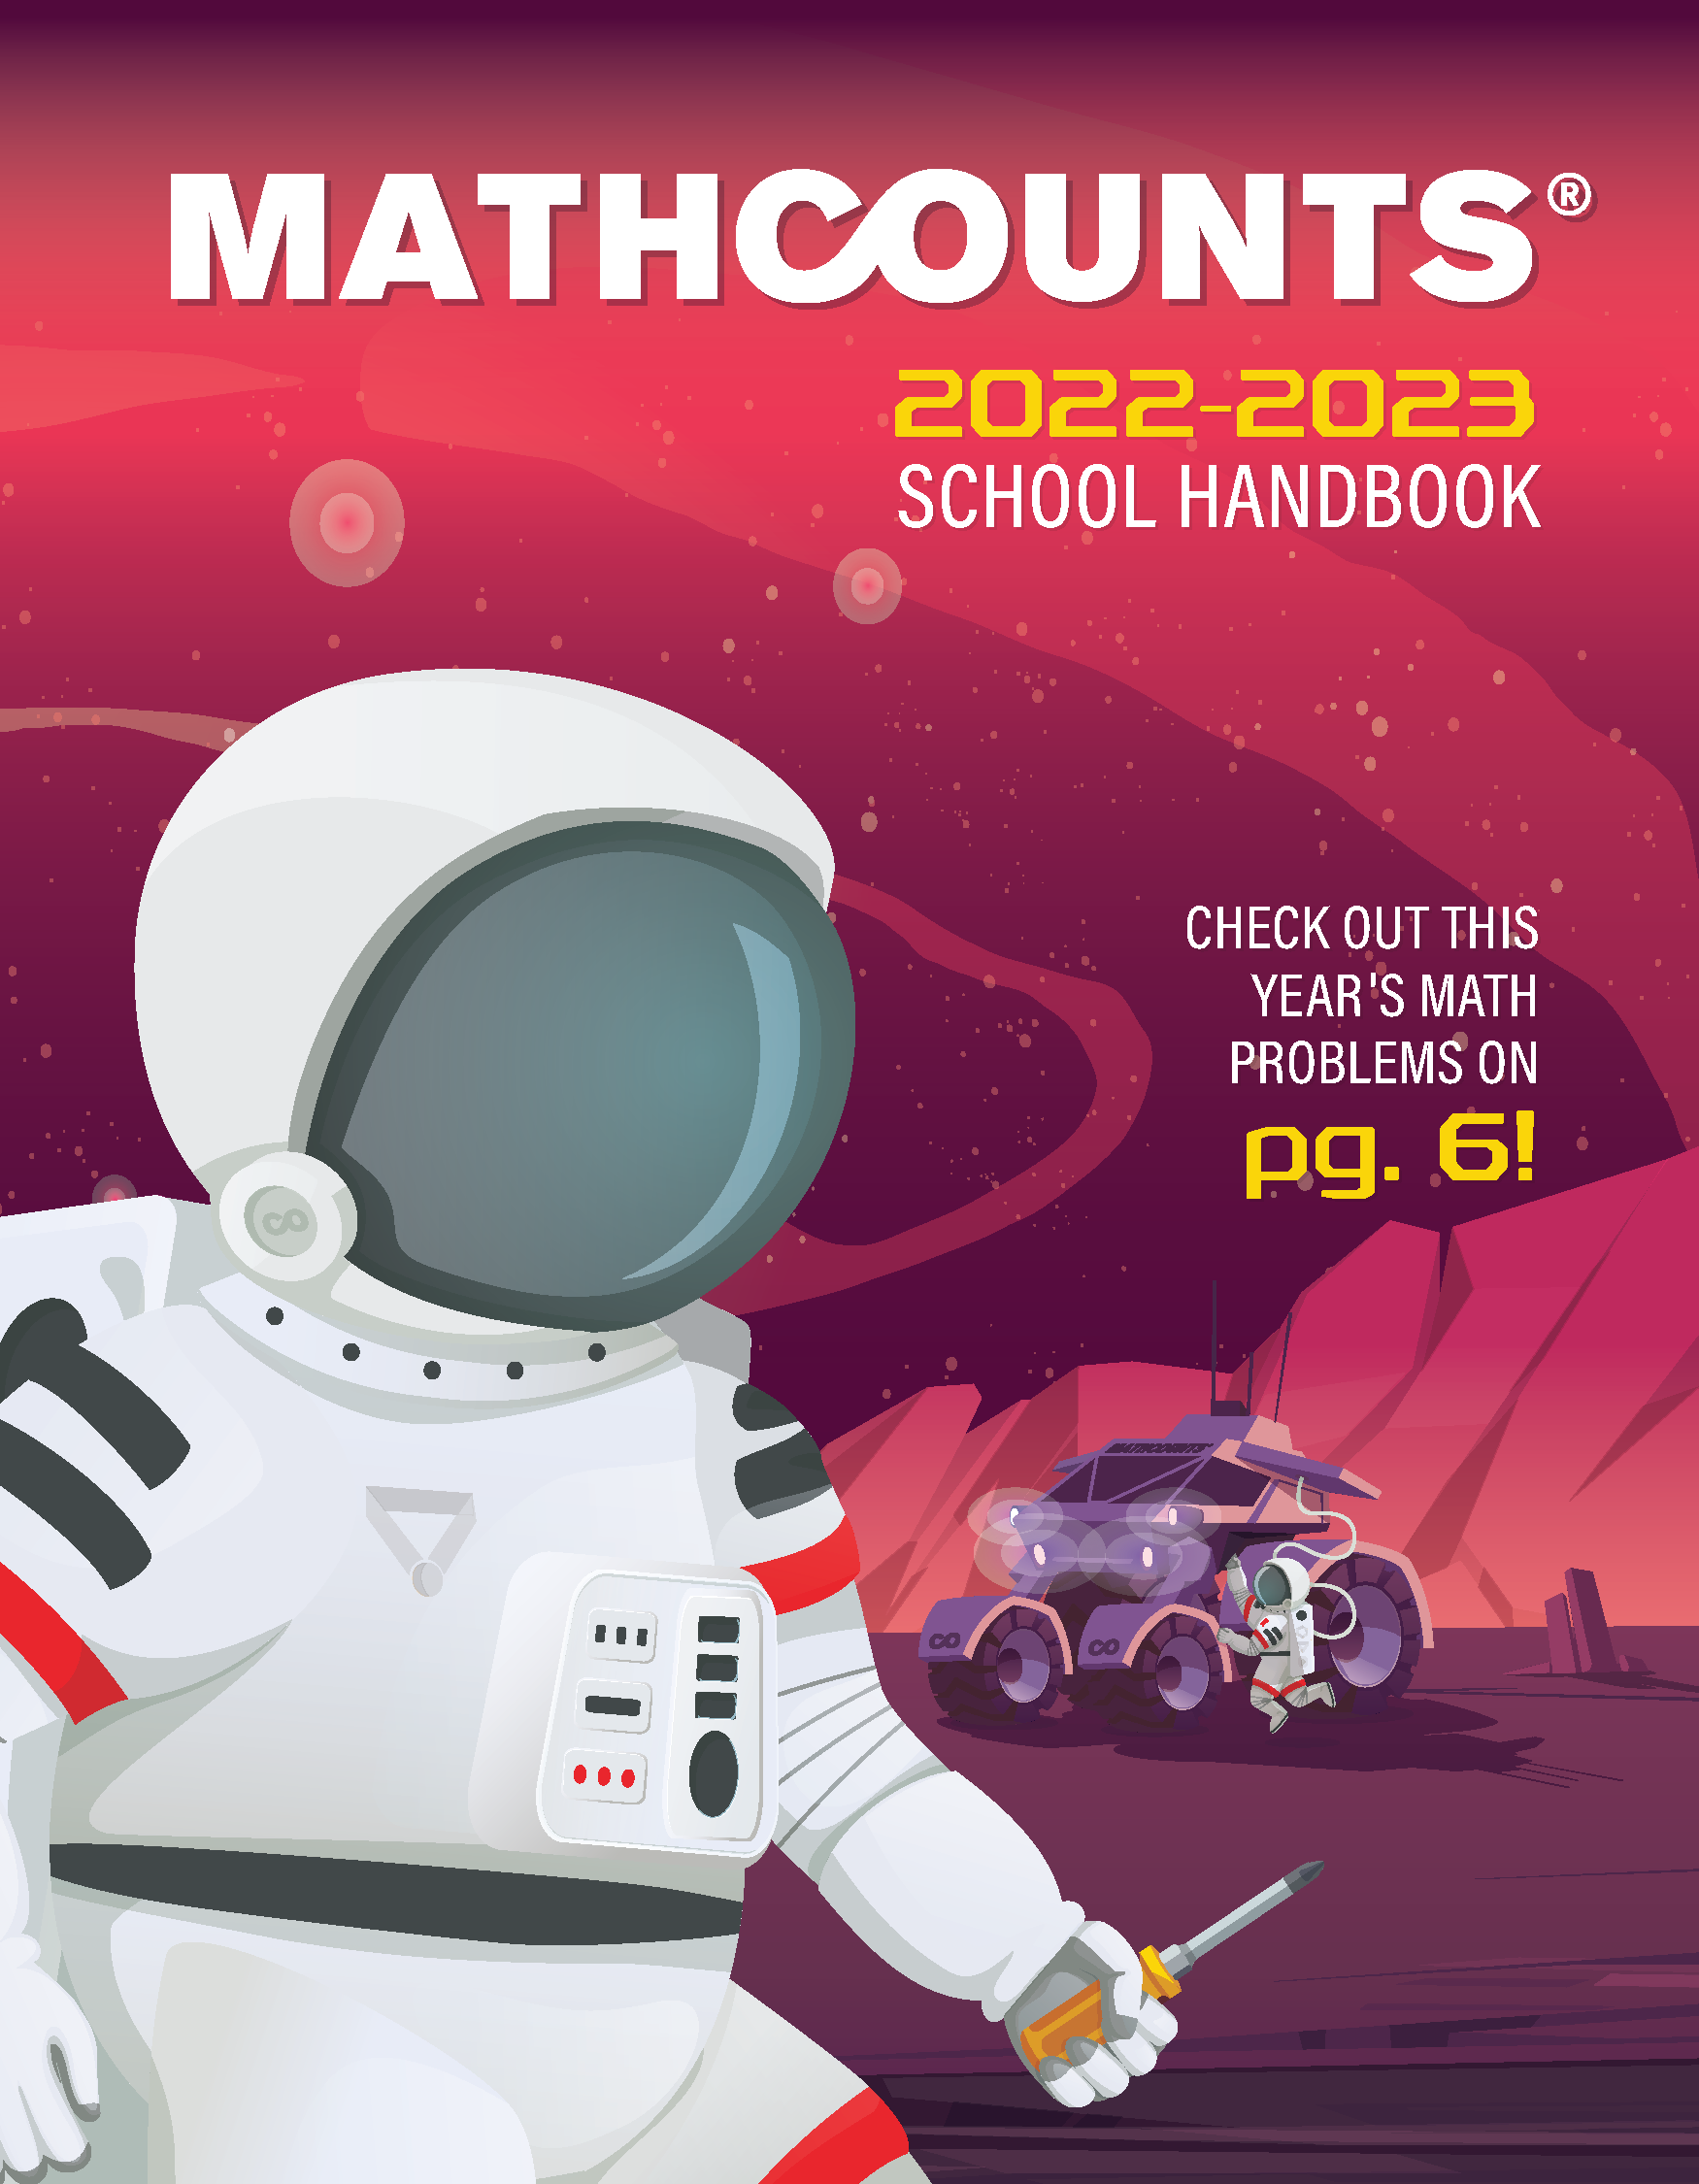 2022-2023 Handbook Cover (astronaut & rover on front)